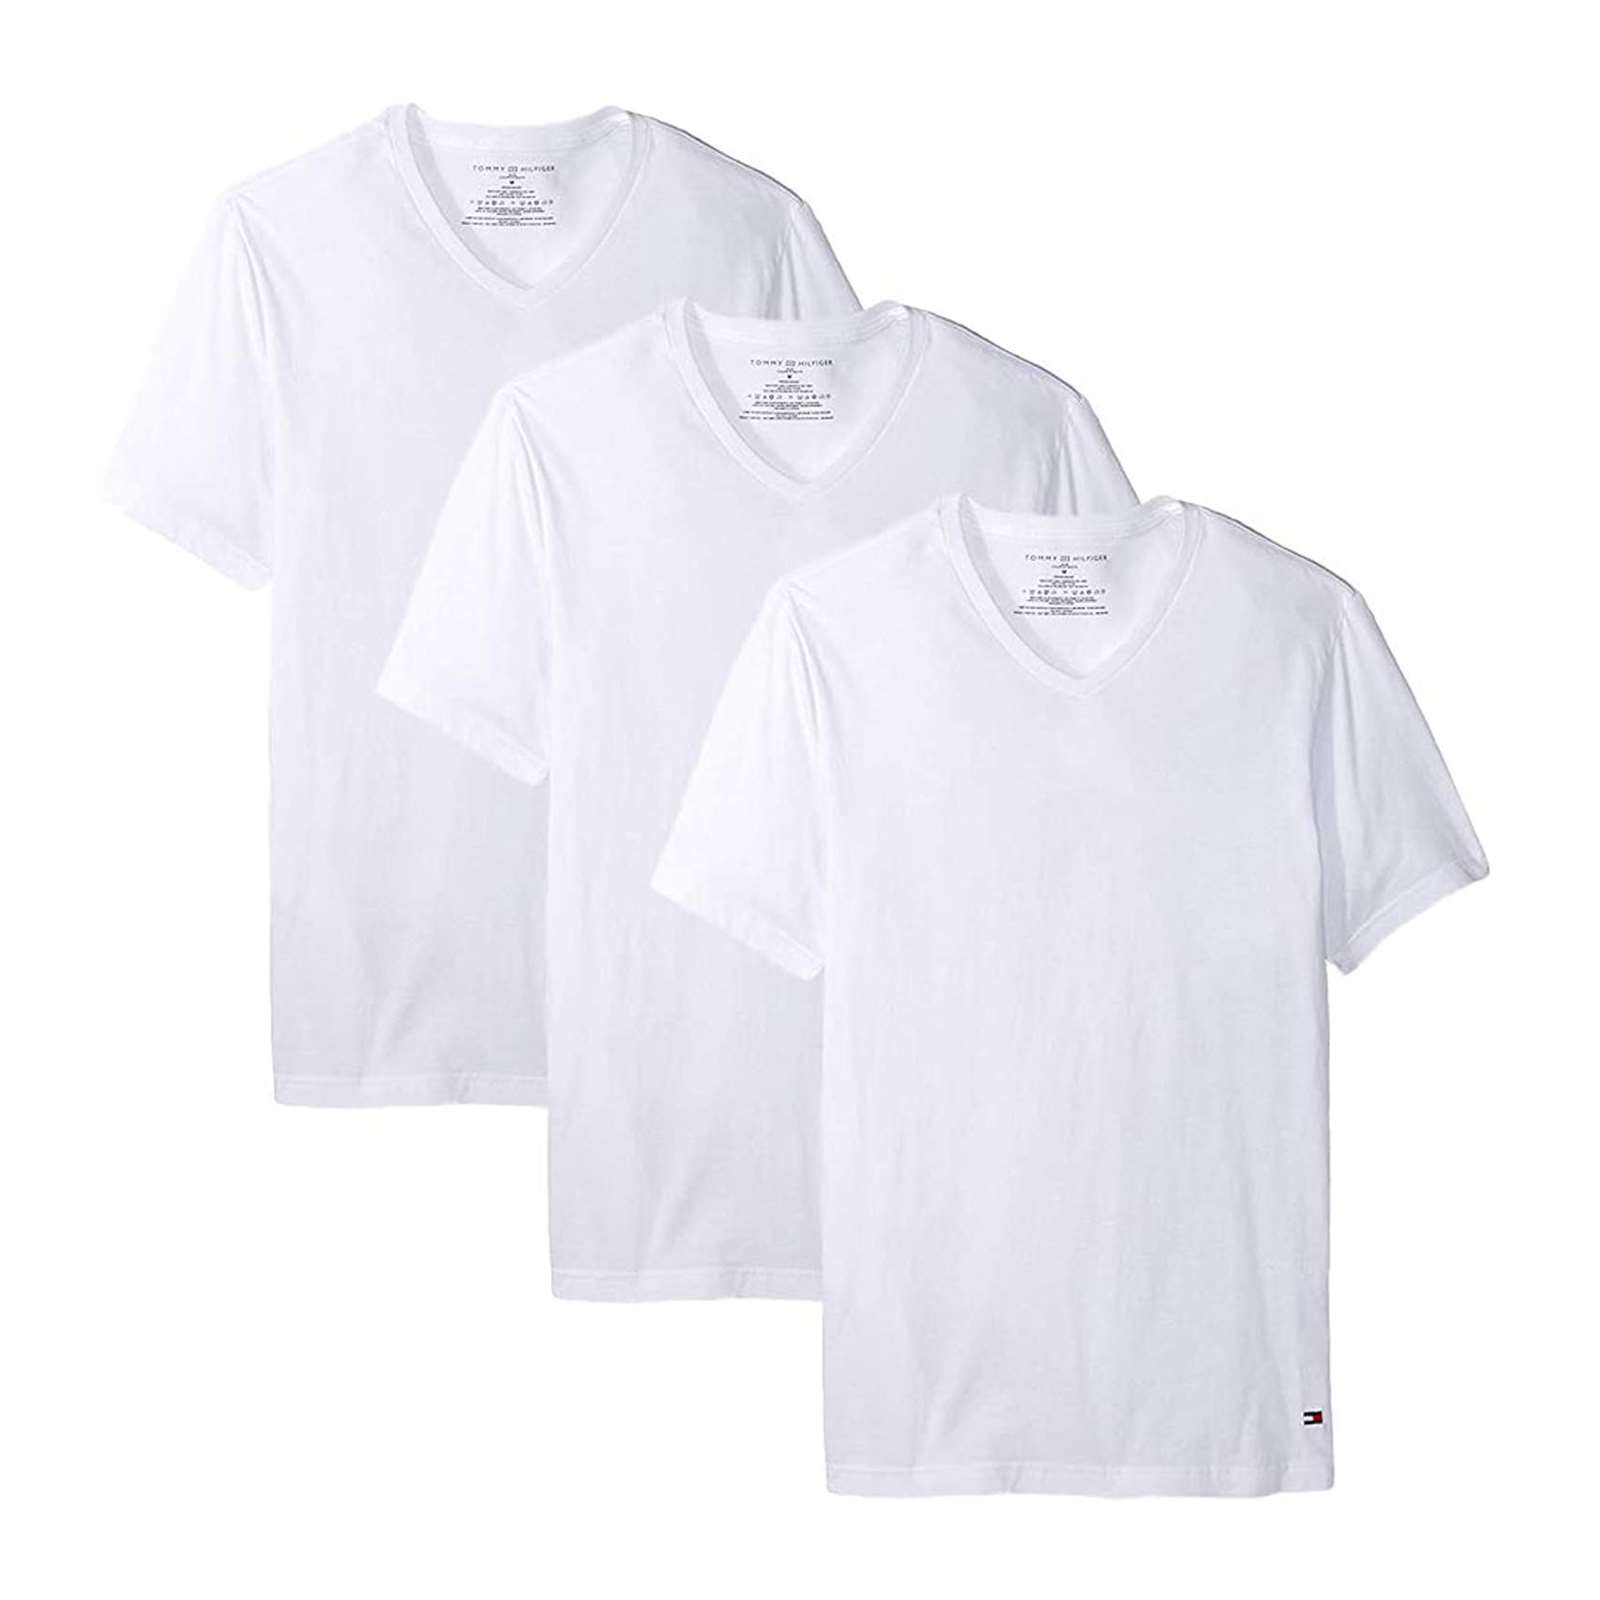 tommy hilfiger classic v neck tee